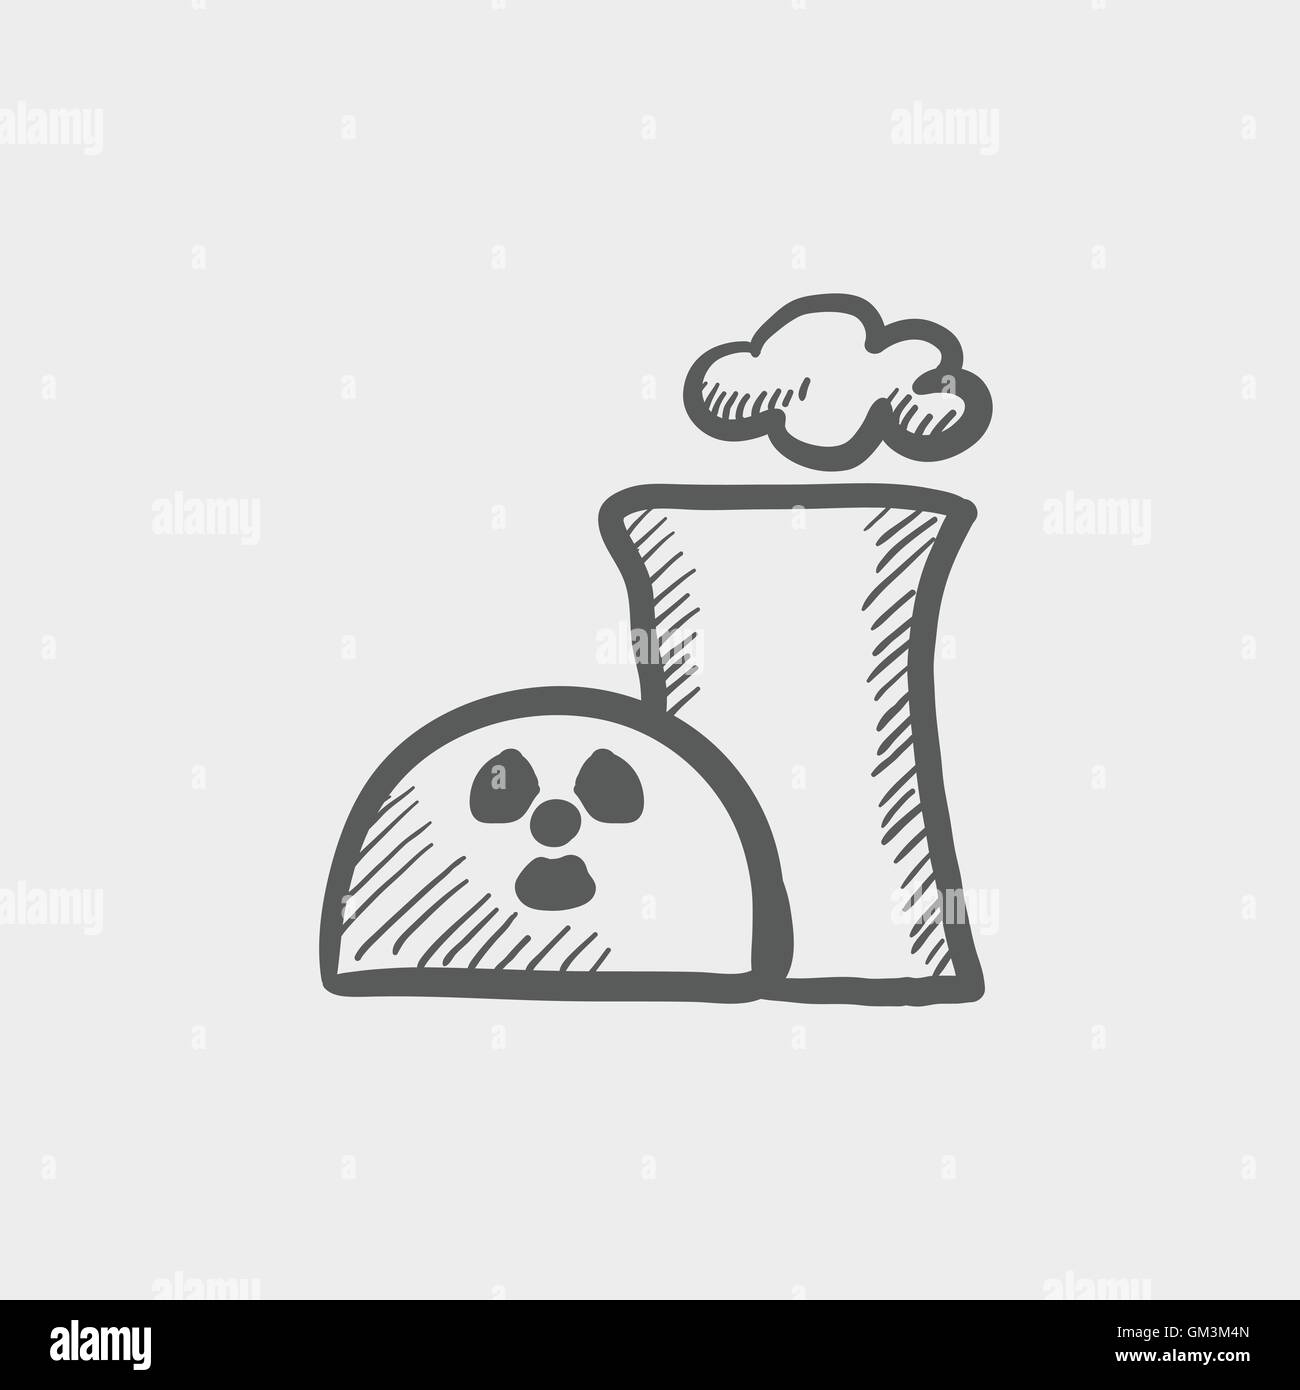 Ecology with propeller sketch icon Stock Vector